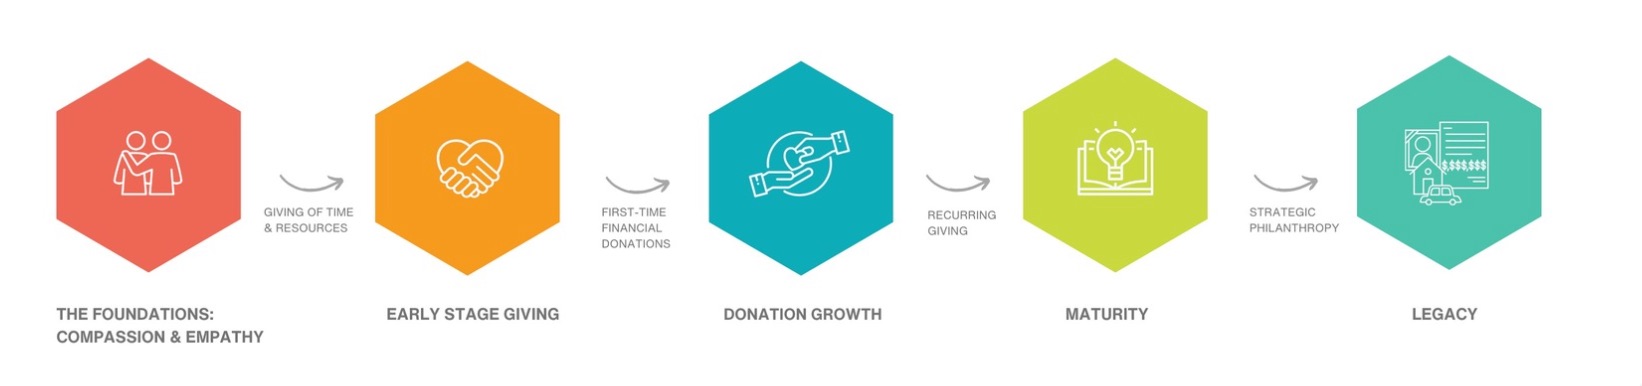 The Donor Lifecycle